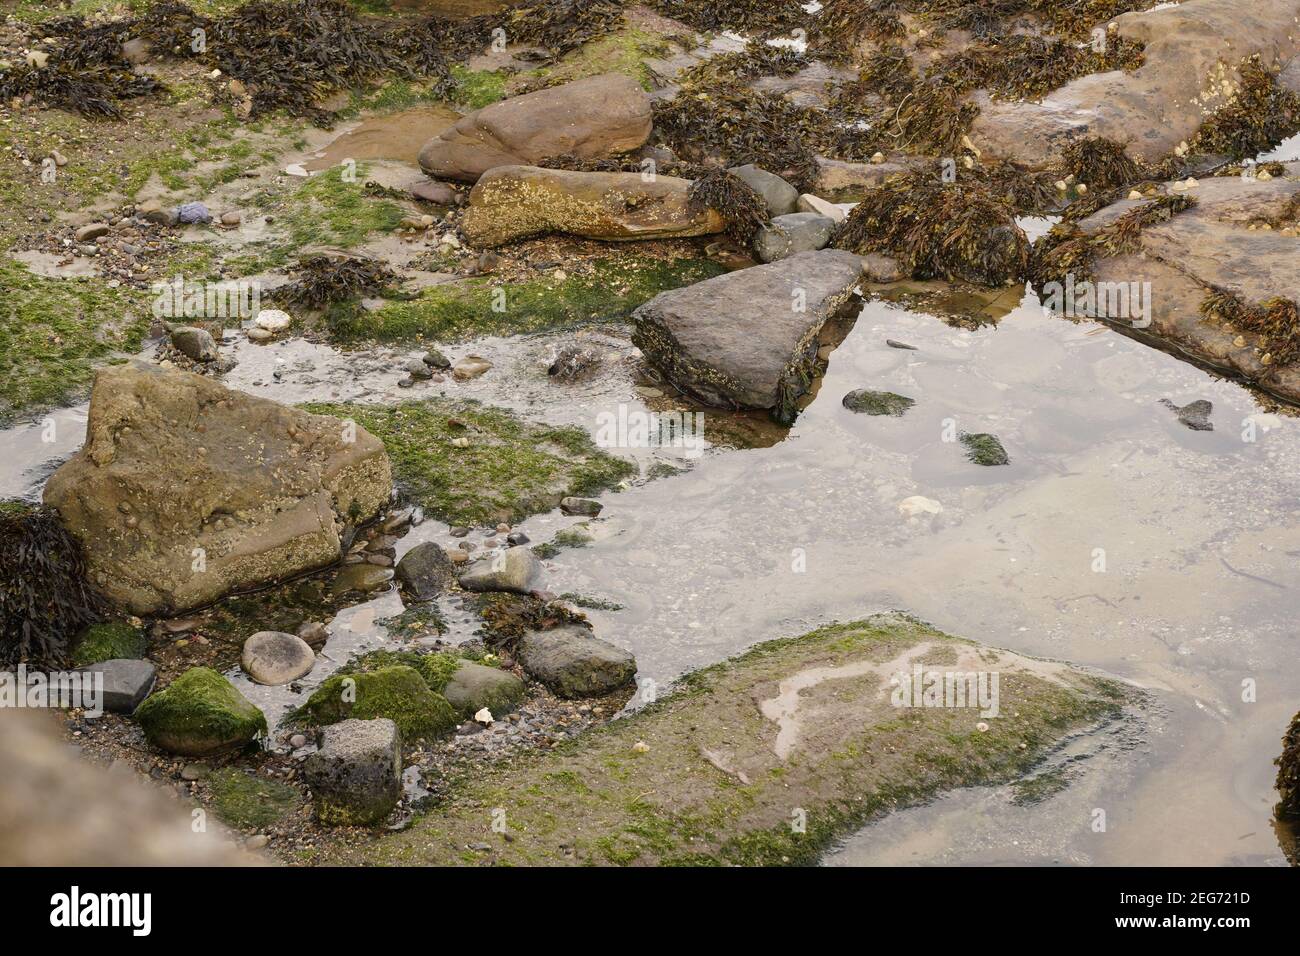 microcosm of sustainable life in a rock pool, natures work Stock Photo